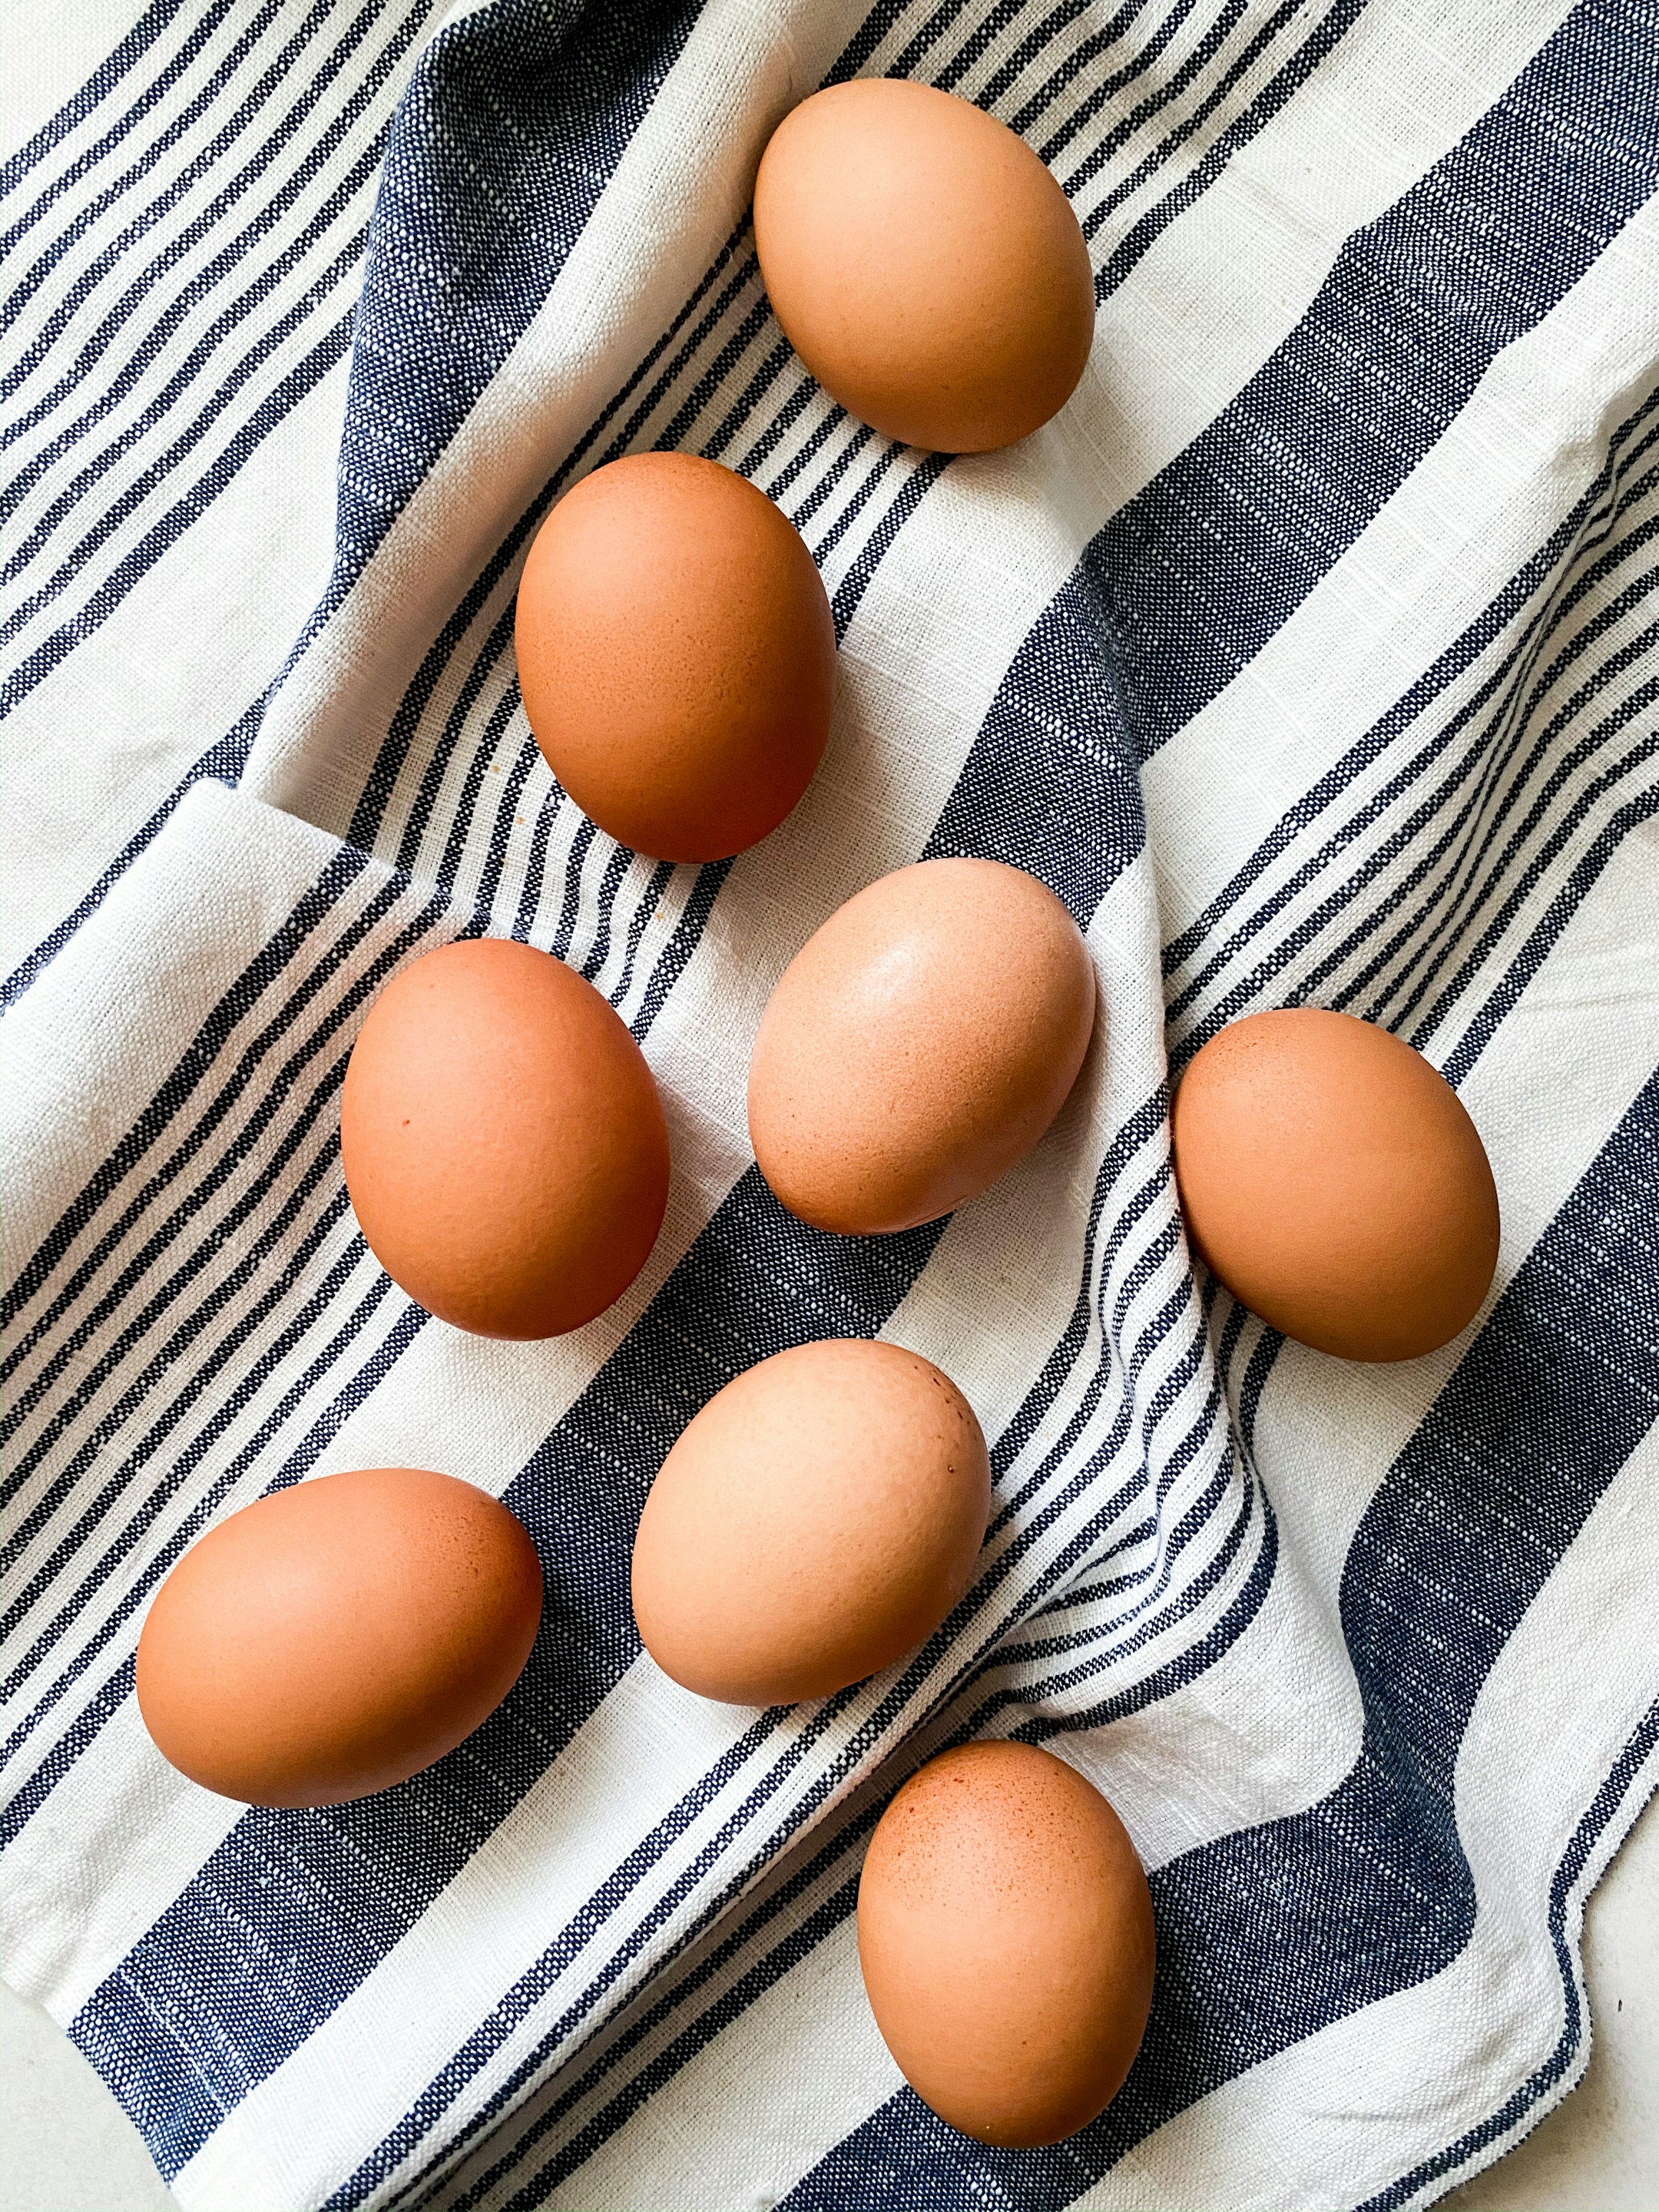 White Eggs vs. Brown Eggs, which is Better?